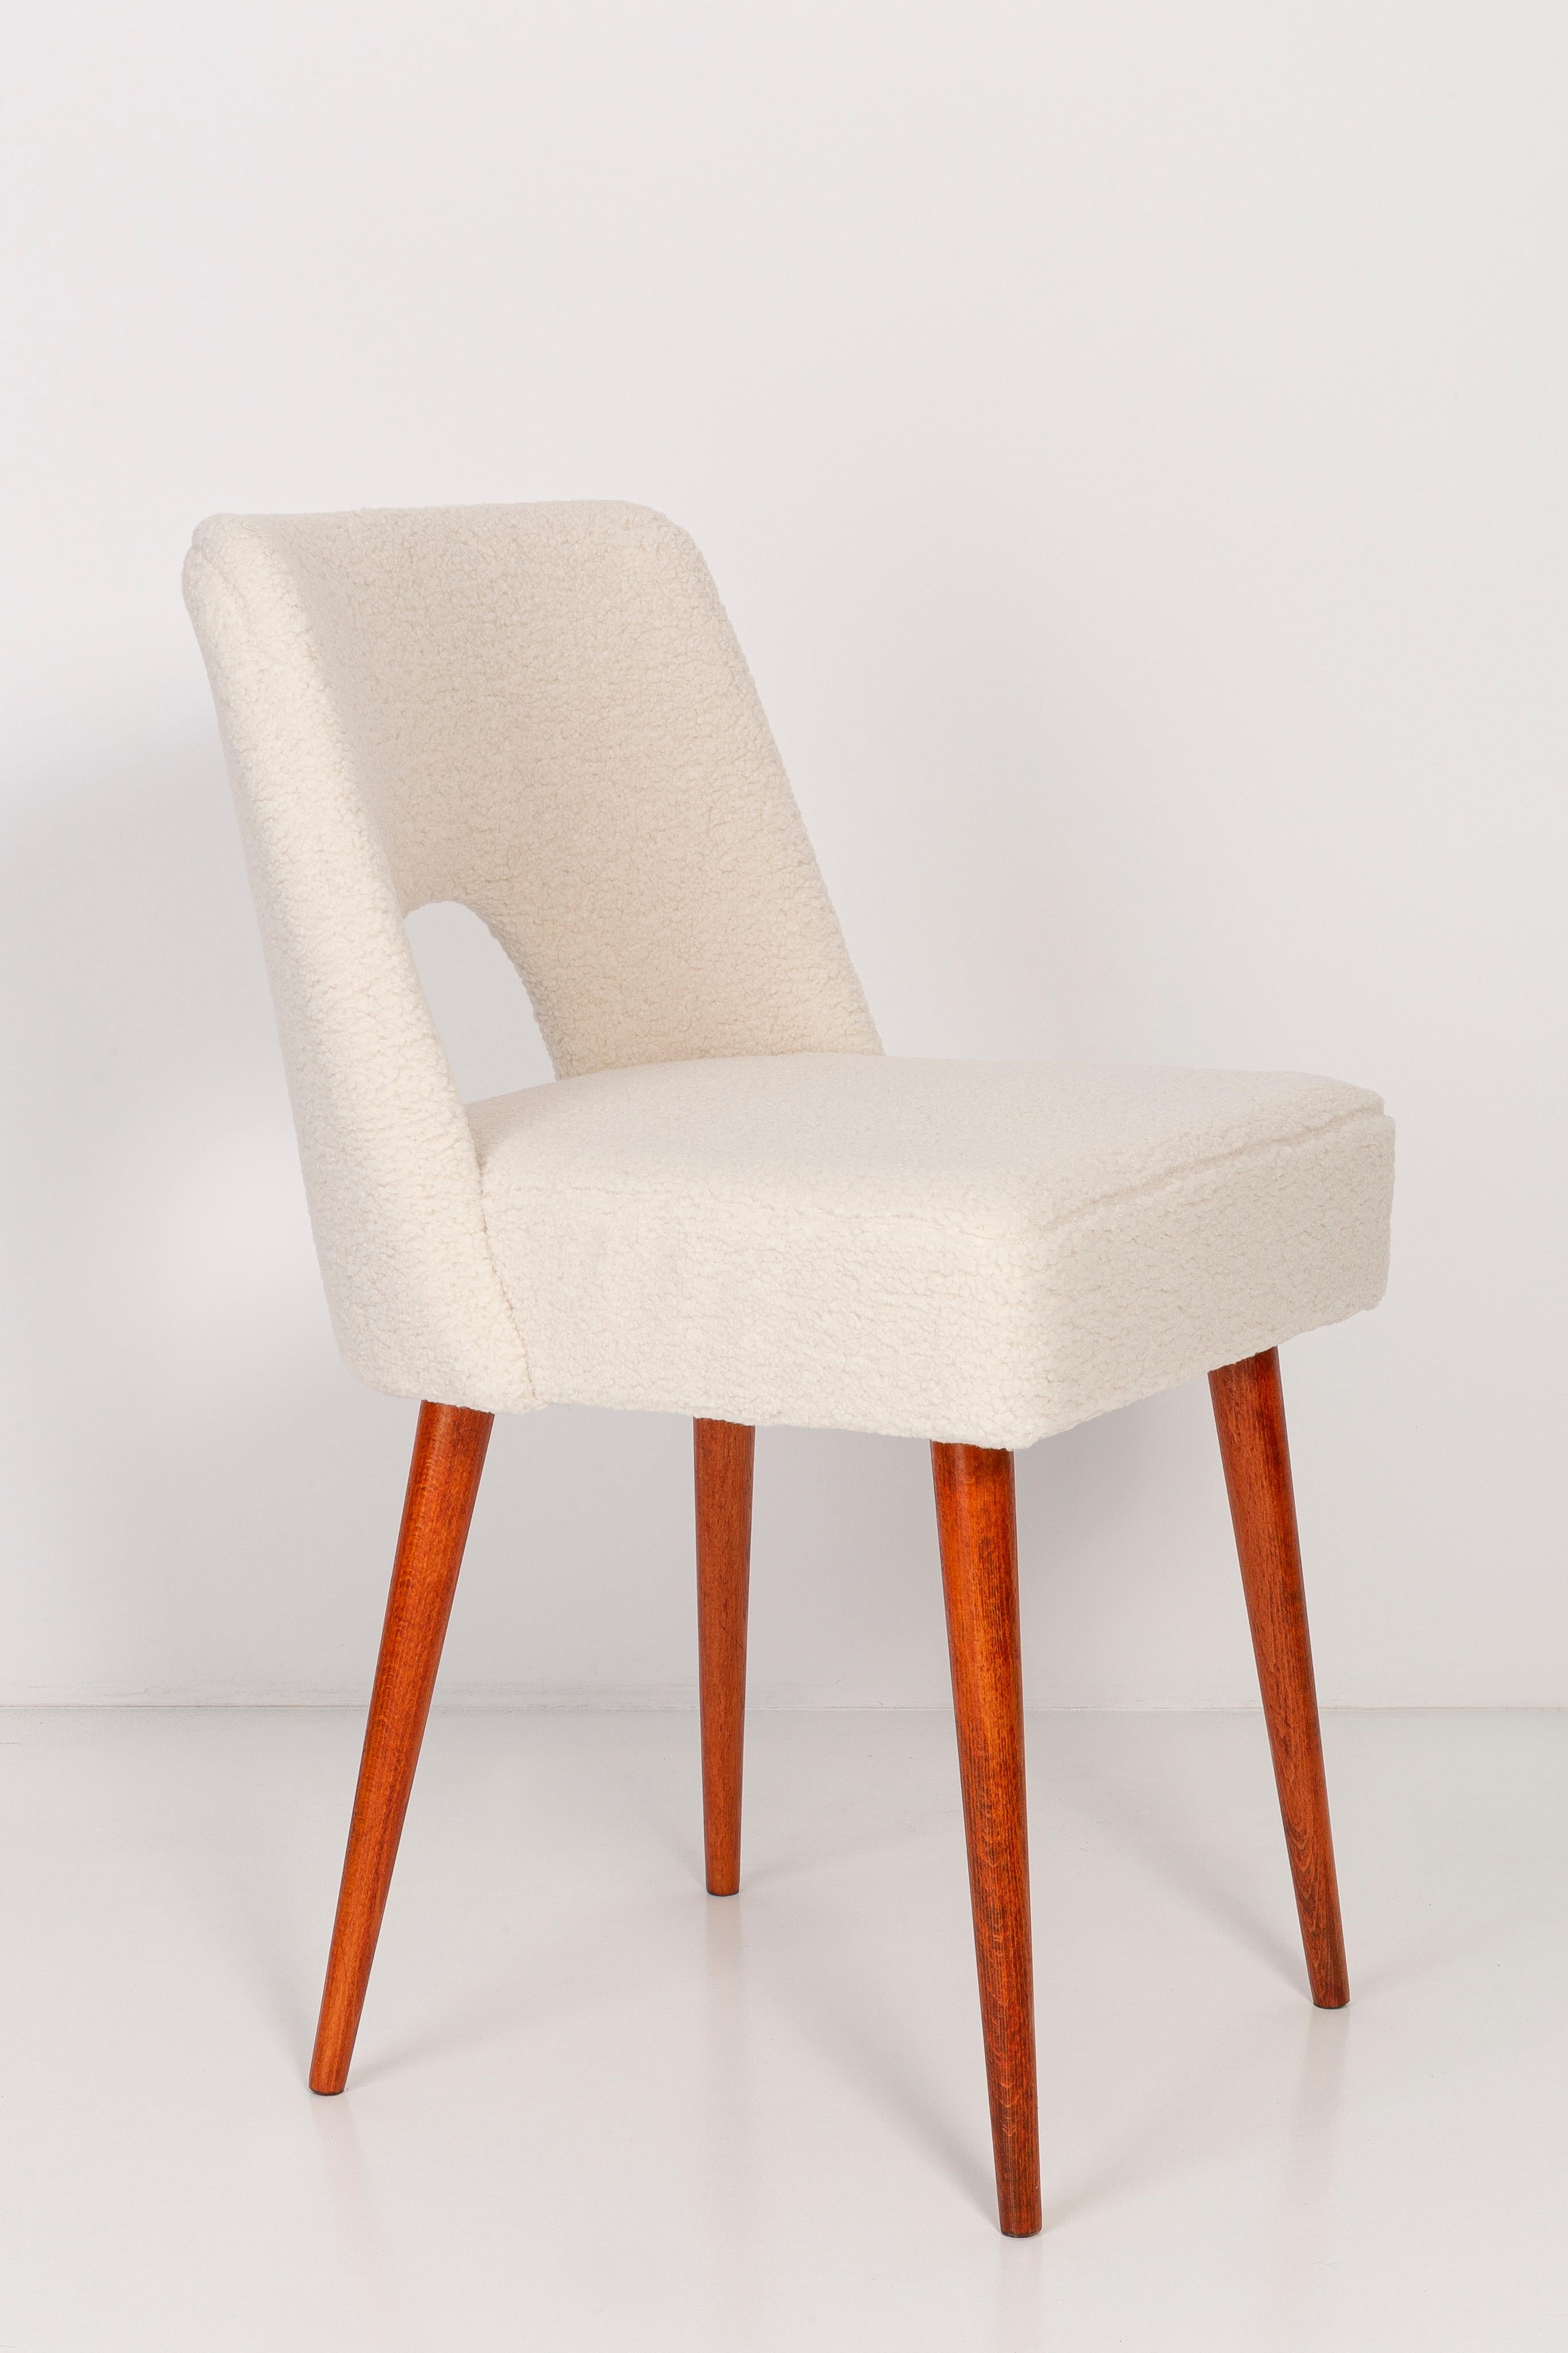 Polish Set of Four Light Crème Boucle 'Shell' Chairs, 1960s For Sale